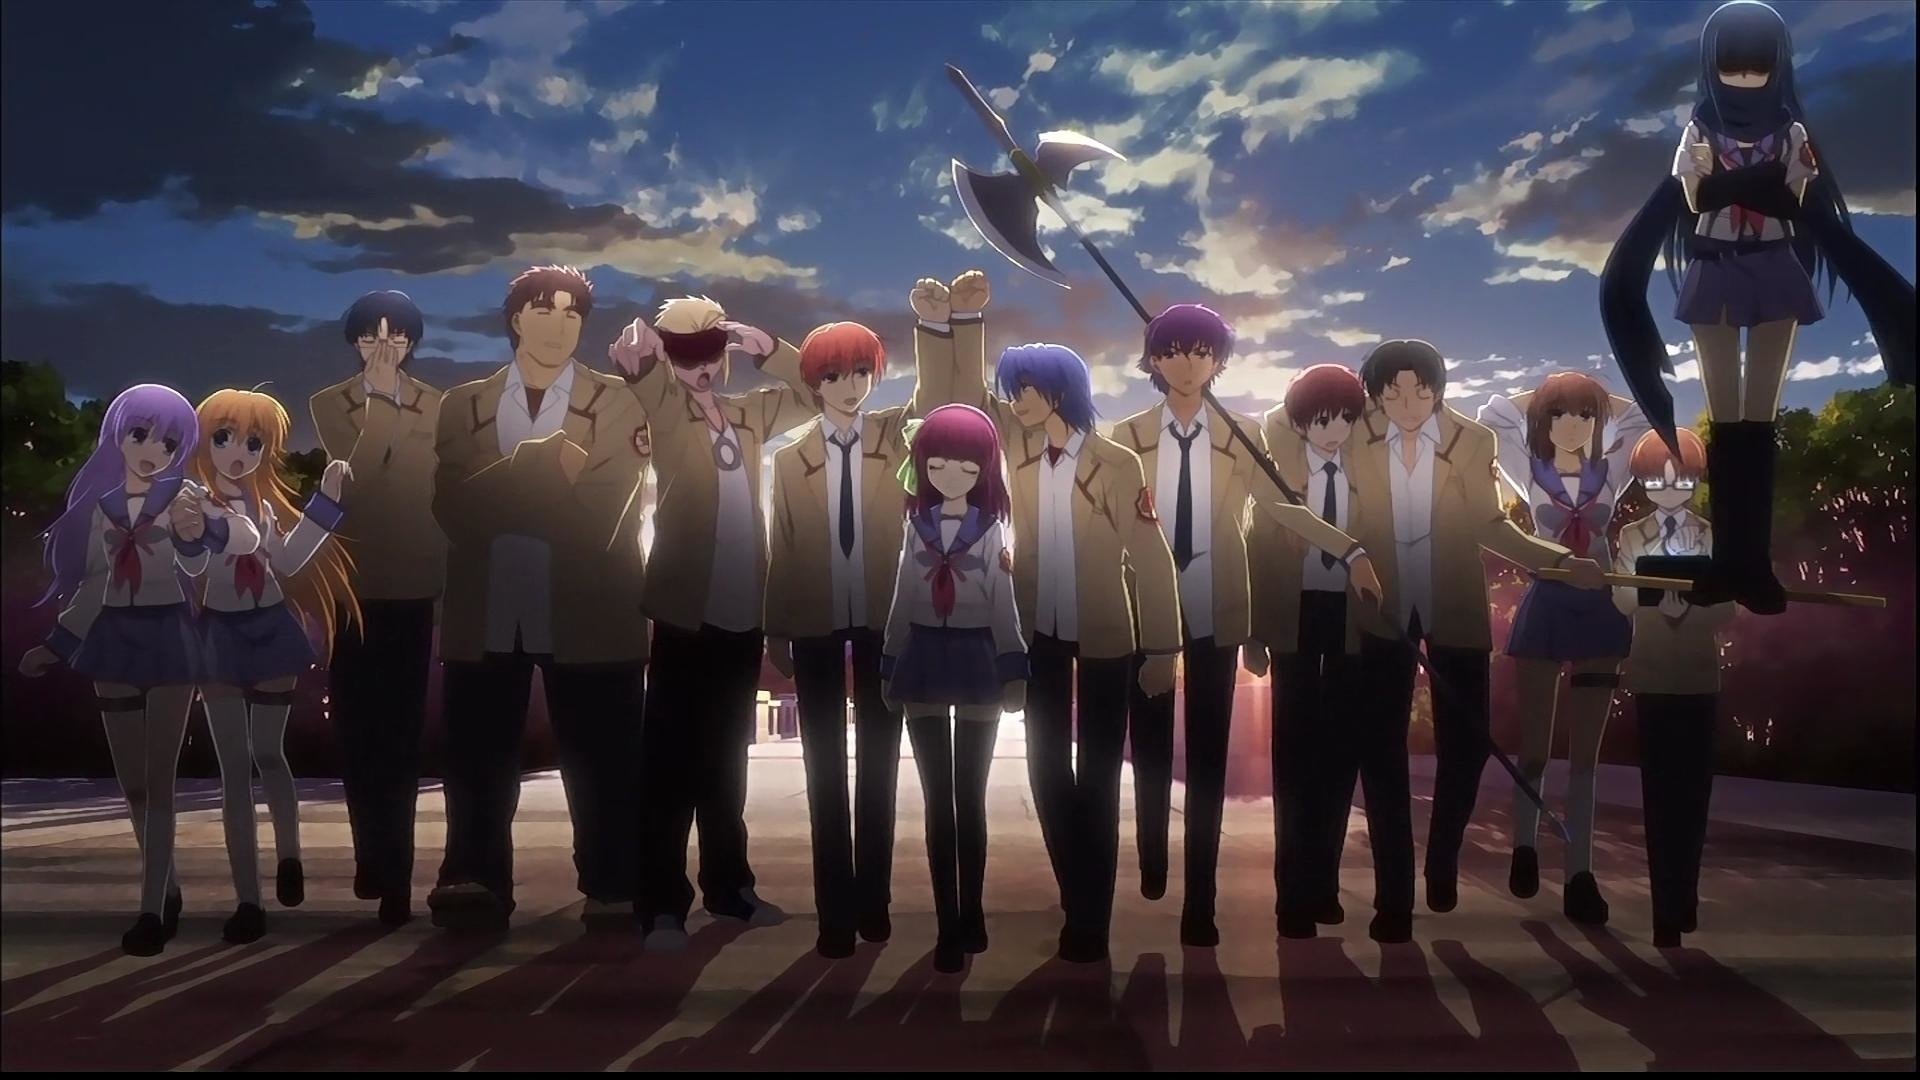 Angel Beats! (Anime): Determined personality, Secretly very sensitive and protective. 1920x1080 Full HD Wallpaper.